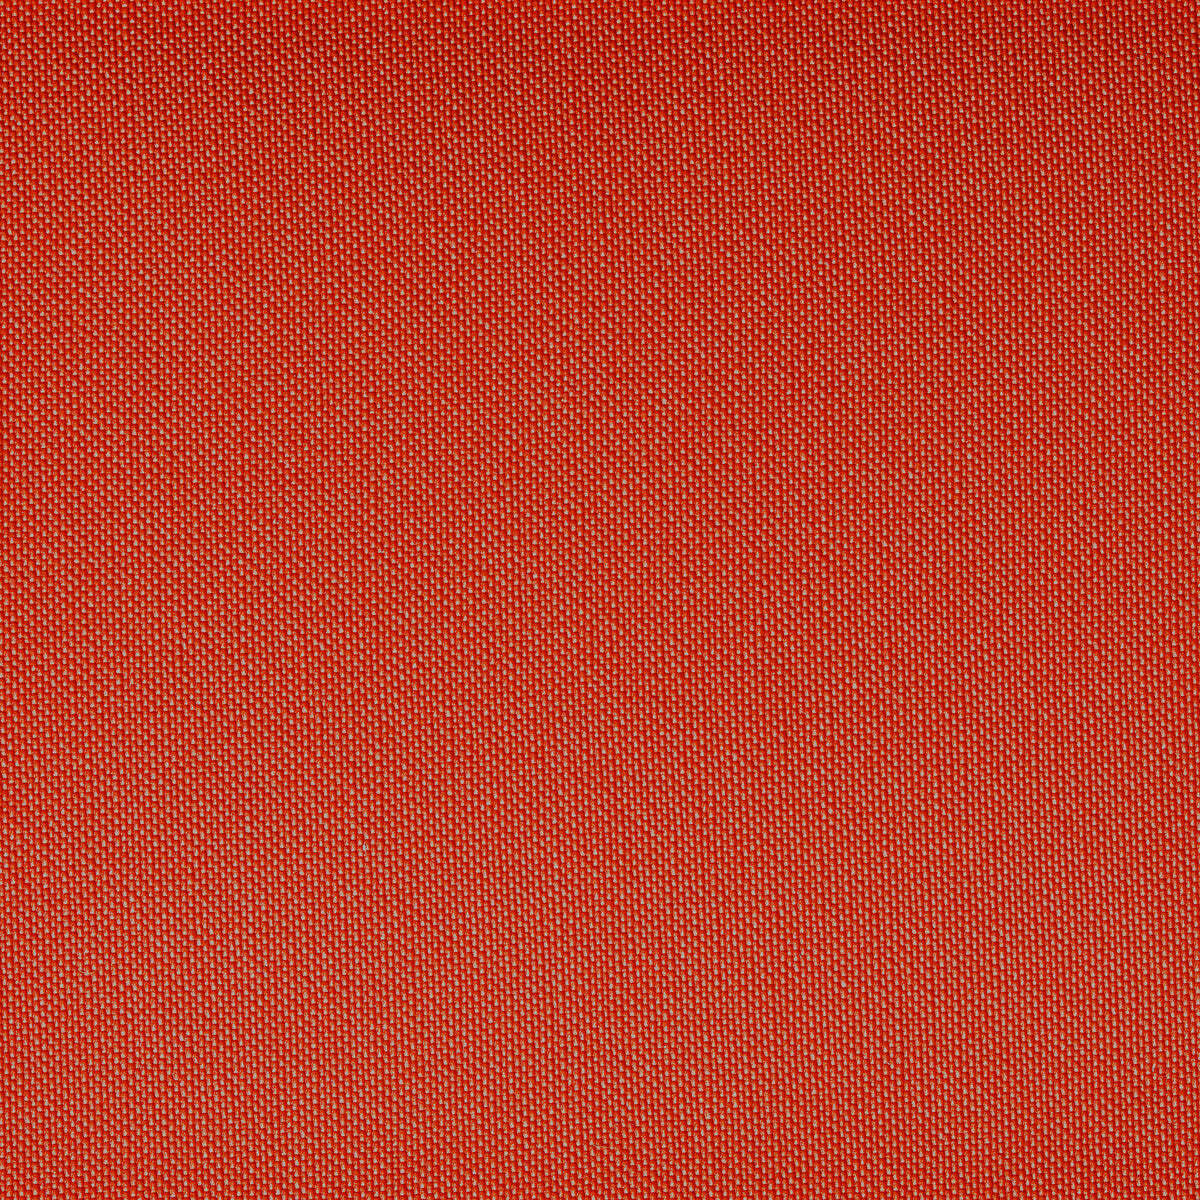 Ventura fabric in persimmon color - pattern VENTURA.24.0 - by Kravet Contract in the Foundations / Value collection